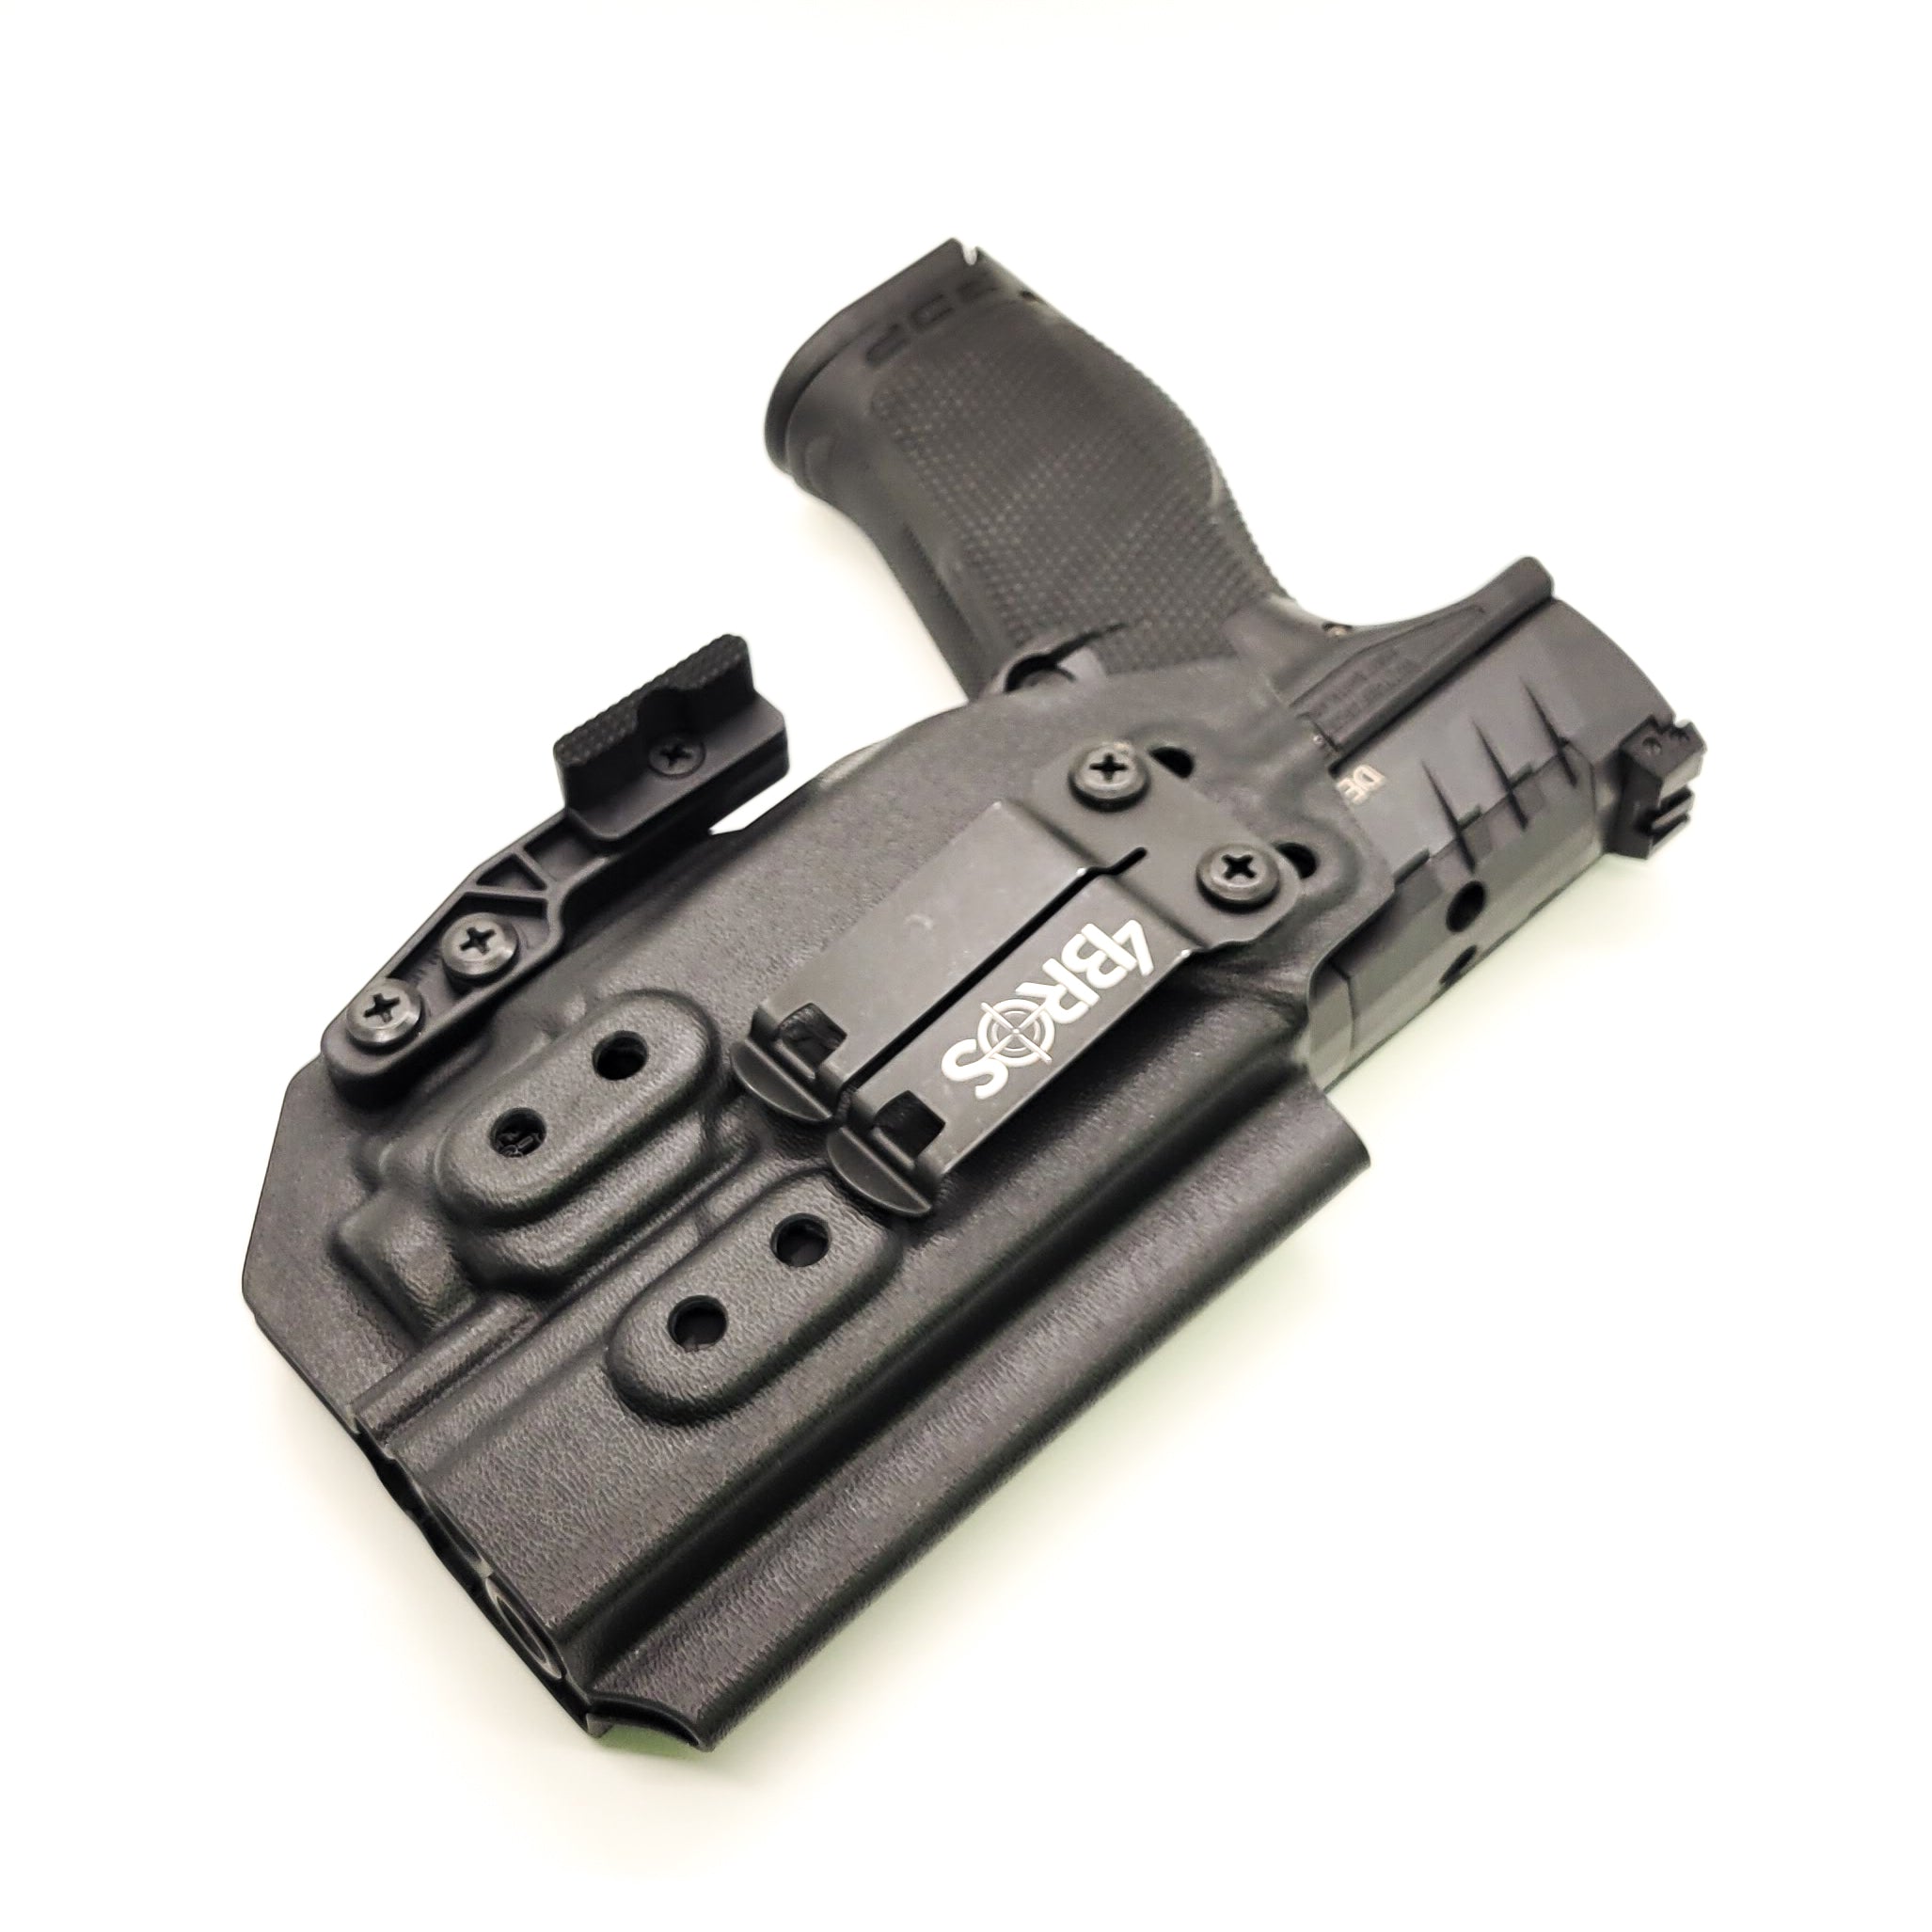 For the best concealed carry Inside Waistband IWB AIWB Holster designed to fit the Walther PDP Pro SD Compact 4" pistol and Streamlight TLR-8 mounted on the firearm, shop Four Brothers Holsters. Cut for red dot sight, full sweat guard, adjustable retention & open muzzle for threaded barrels & compensators.